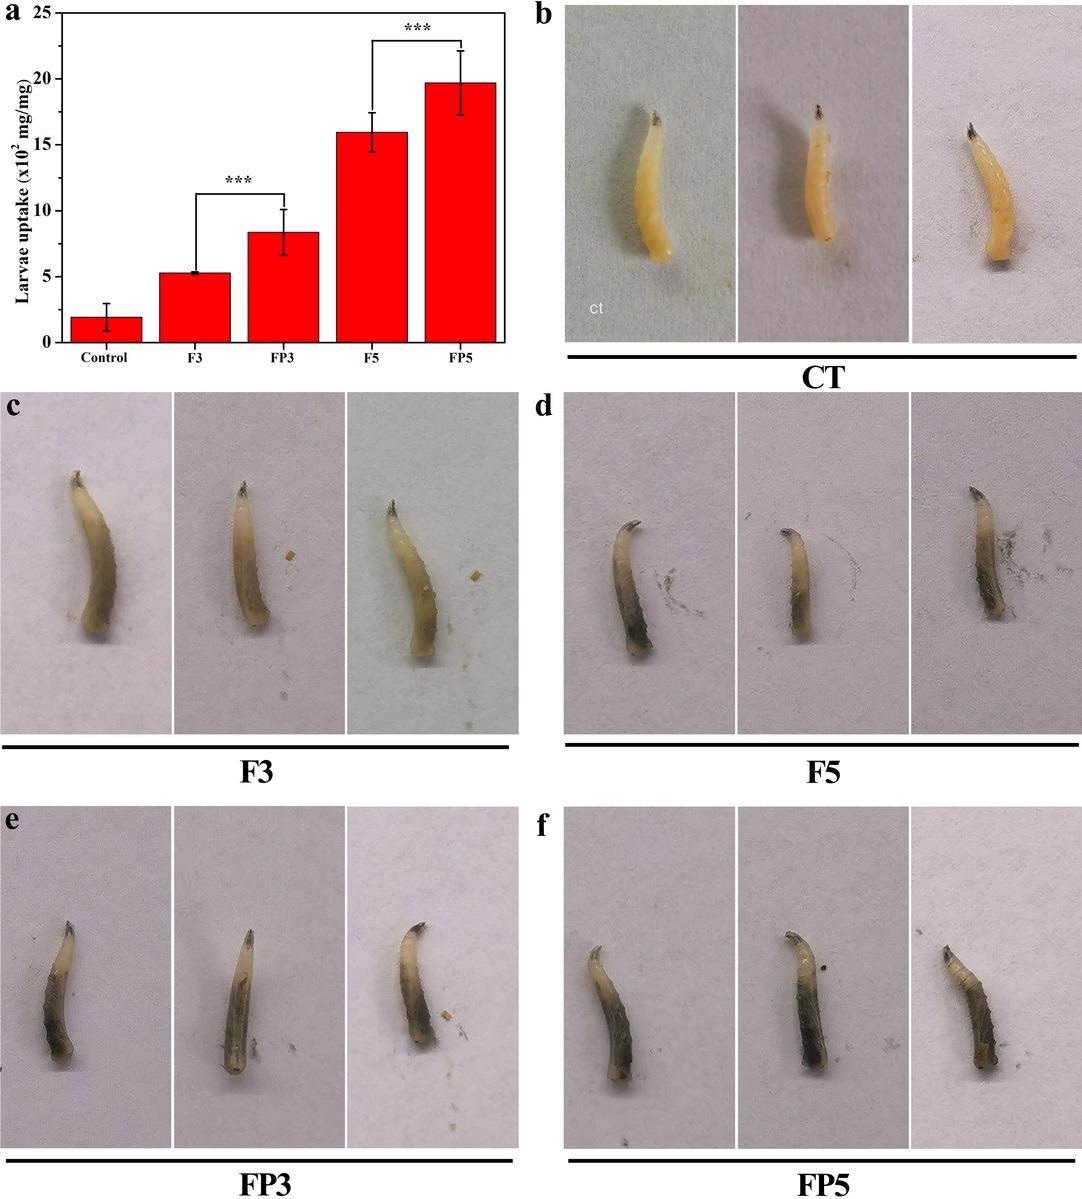 (a) Uptake data for F3 vs. FP3, F5 vs. FP5. Data are reported as the ratio of Fe content in larvae to the body weight. Representative photographic image of (b) control larvae and larvae after feeding with (c) F3, (d) F5, (e) FP3, and (f) FP5 for two days. NP-free feeding materials were used to feed larvae serving as controls.